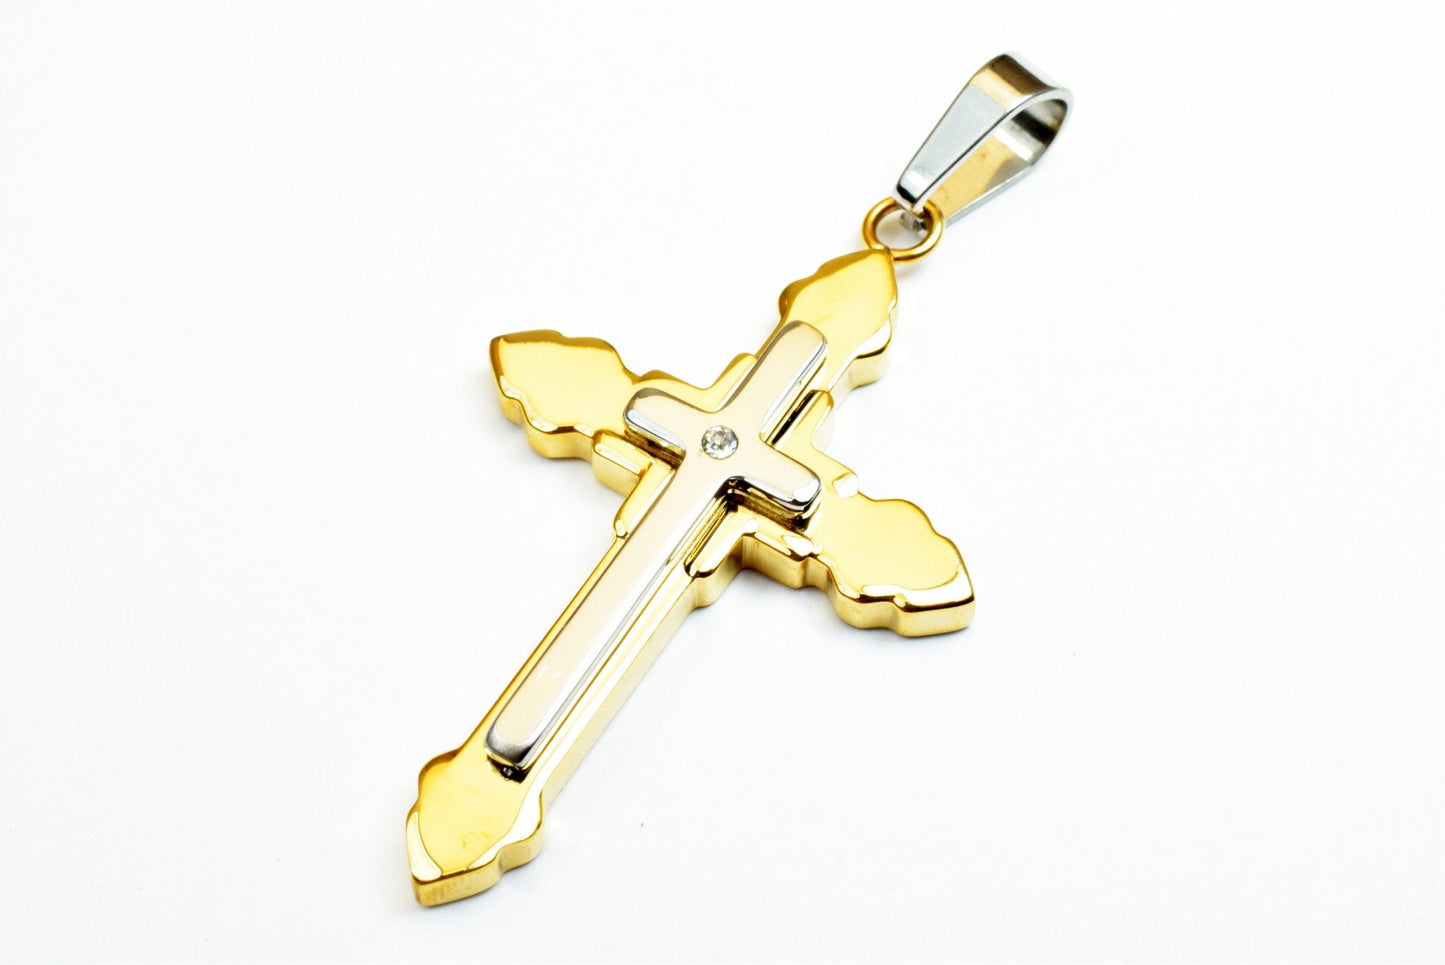 18K Gold Filled Cross Religious Pendants Stainless Steel Size 52x32mm Christian Religious, First Communion Baby Baptism For Jewelry Making